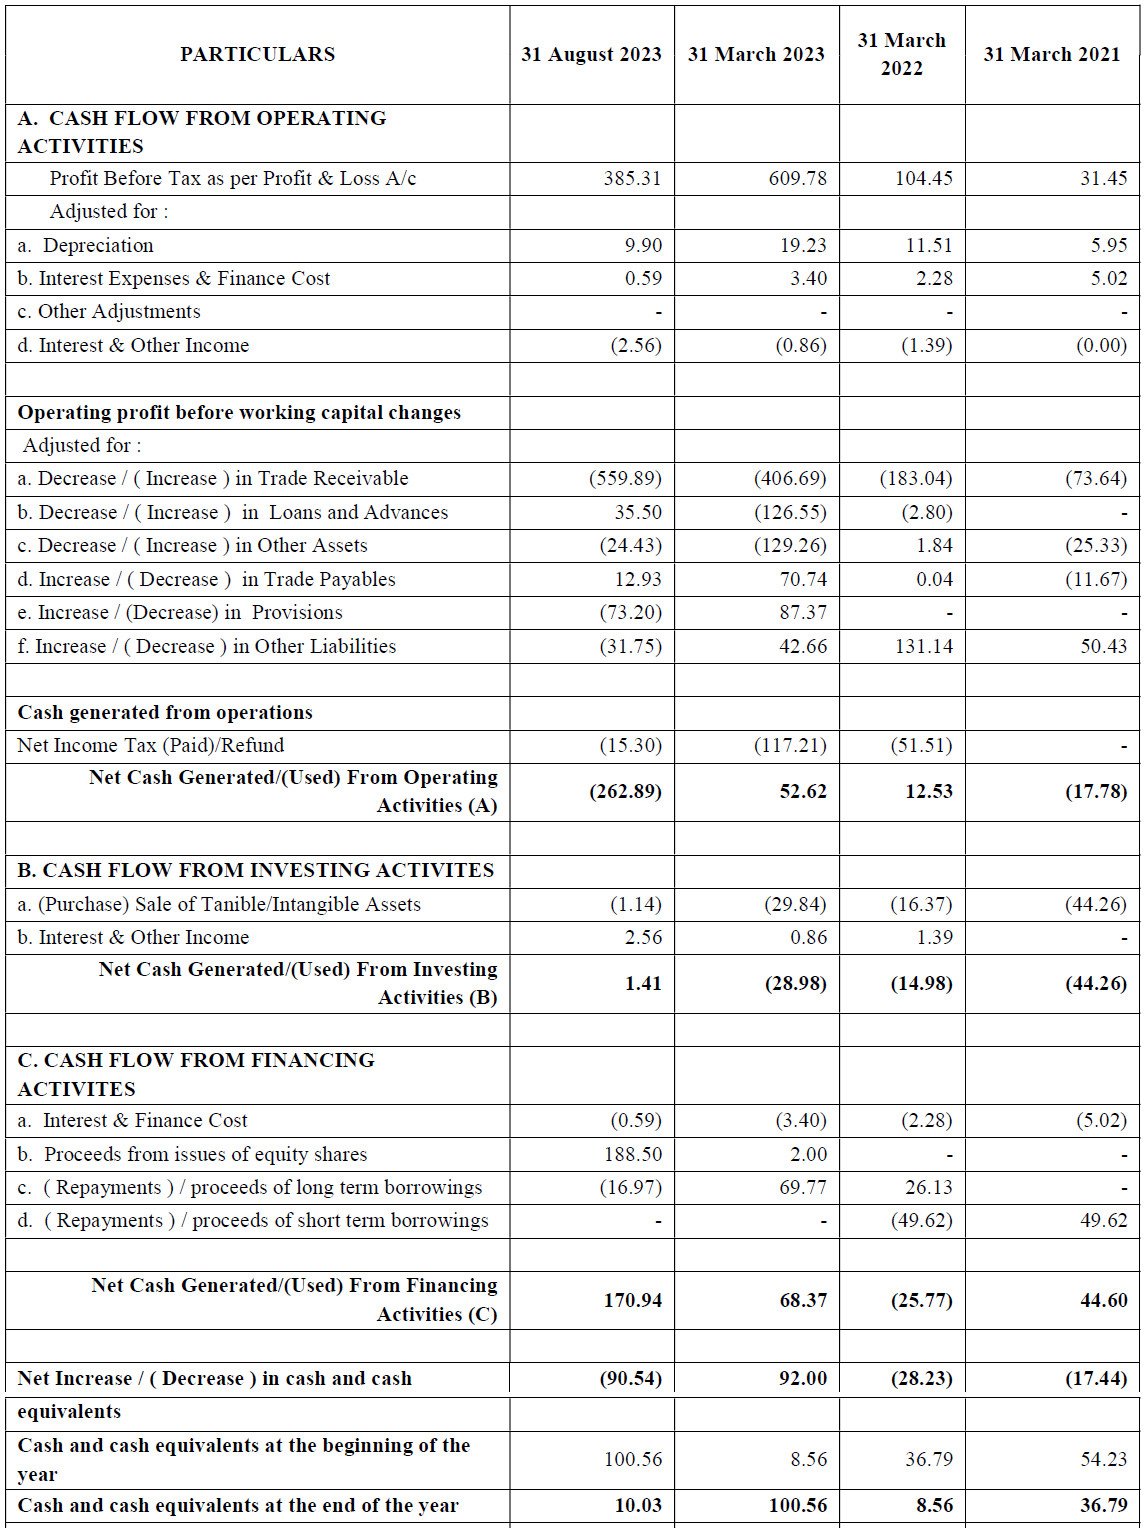 Cash flows of Akiko Global Services IPO